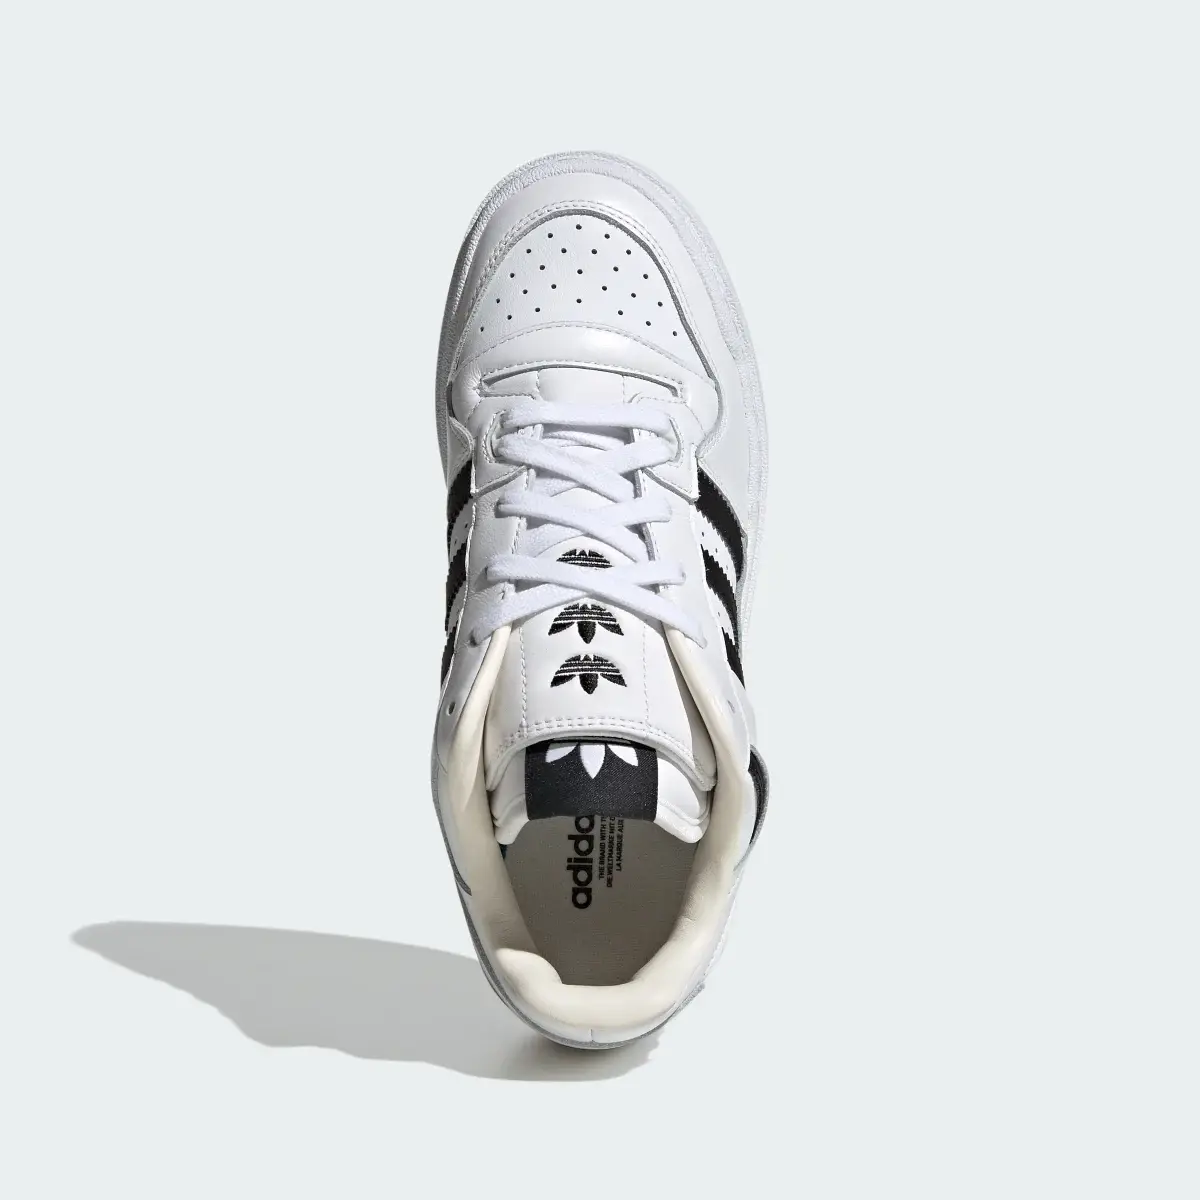 Adidas Chaussure Forum XLG. 3